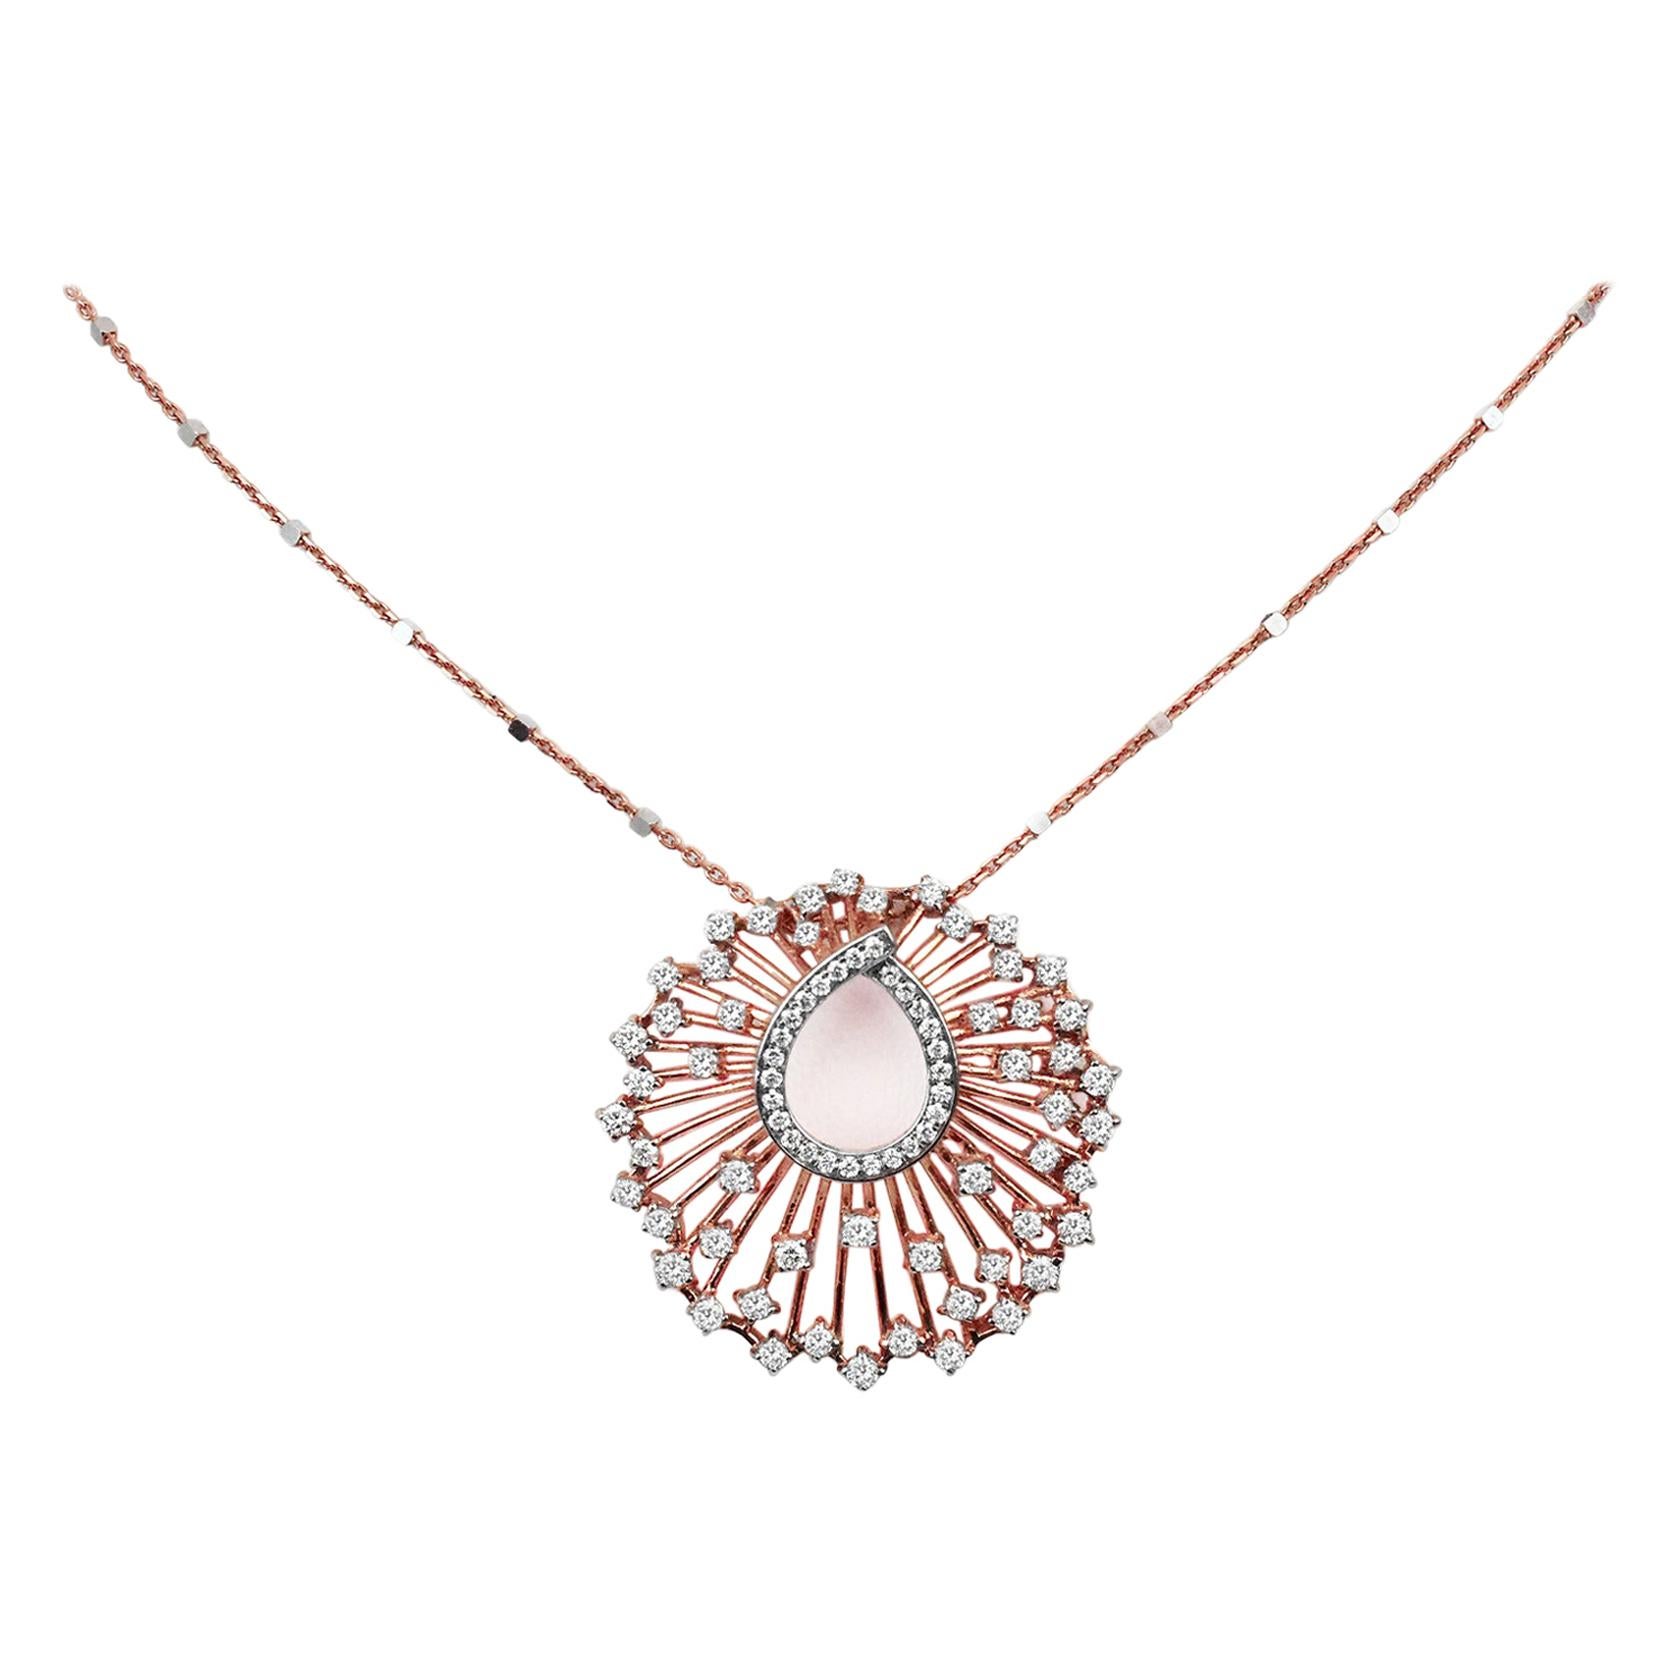 18Karat Gold Pendant Necklace Two-Tone White Gold Rose Gold Diamond Pave Fashion Pendant Necklace
             A fashion Art Nouveau open textured pendant necklace meticulously crafted to mesmerize. Each part of this art piece shows the passion for